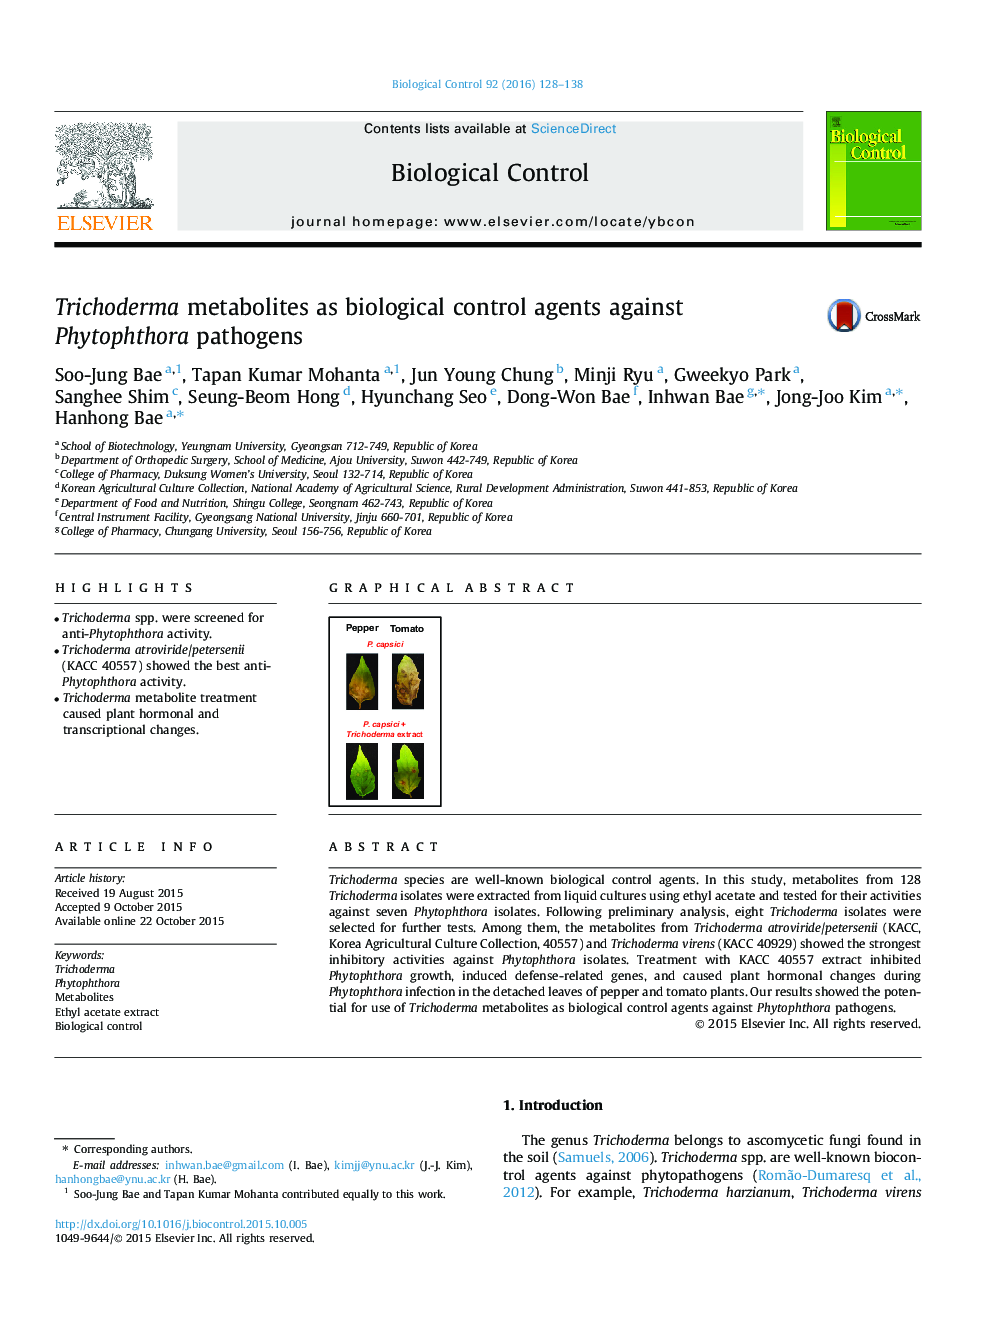 Trichoderma metabolites as biological control agents against Phytophthora pathogens